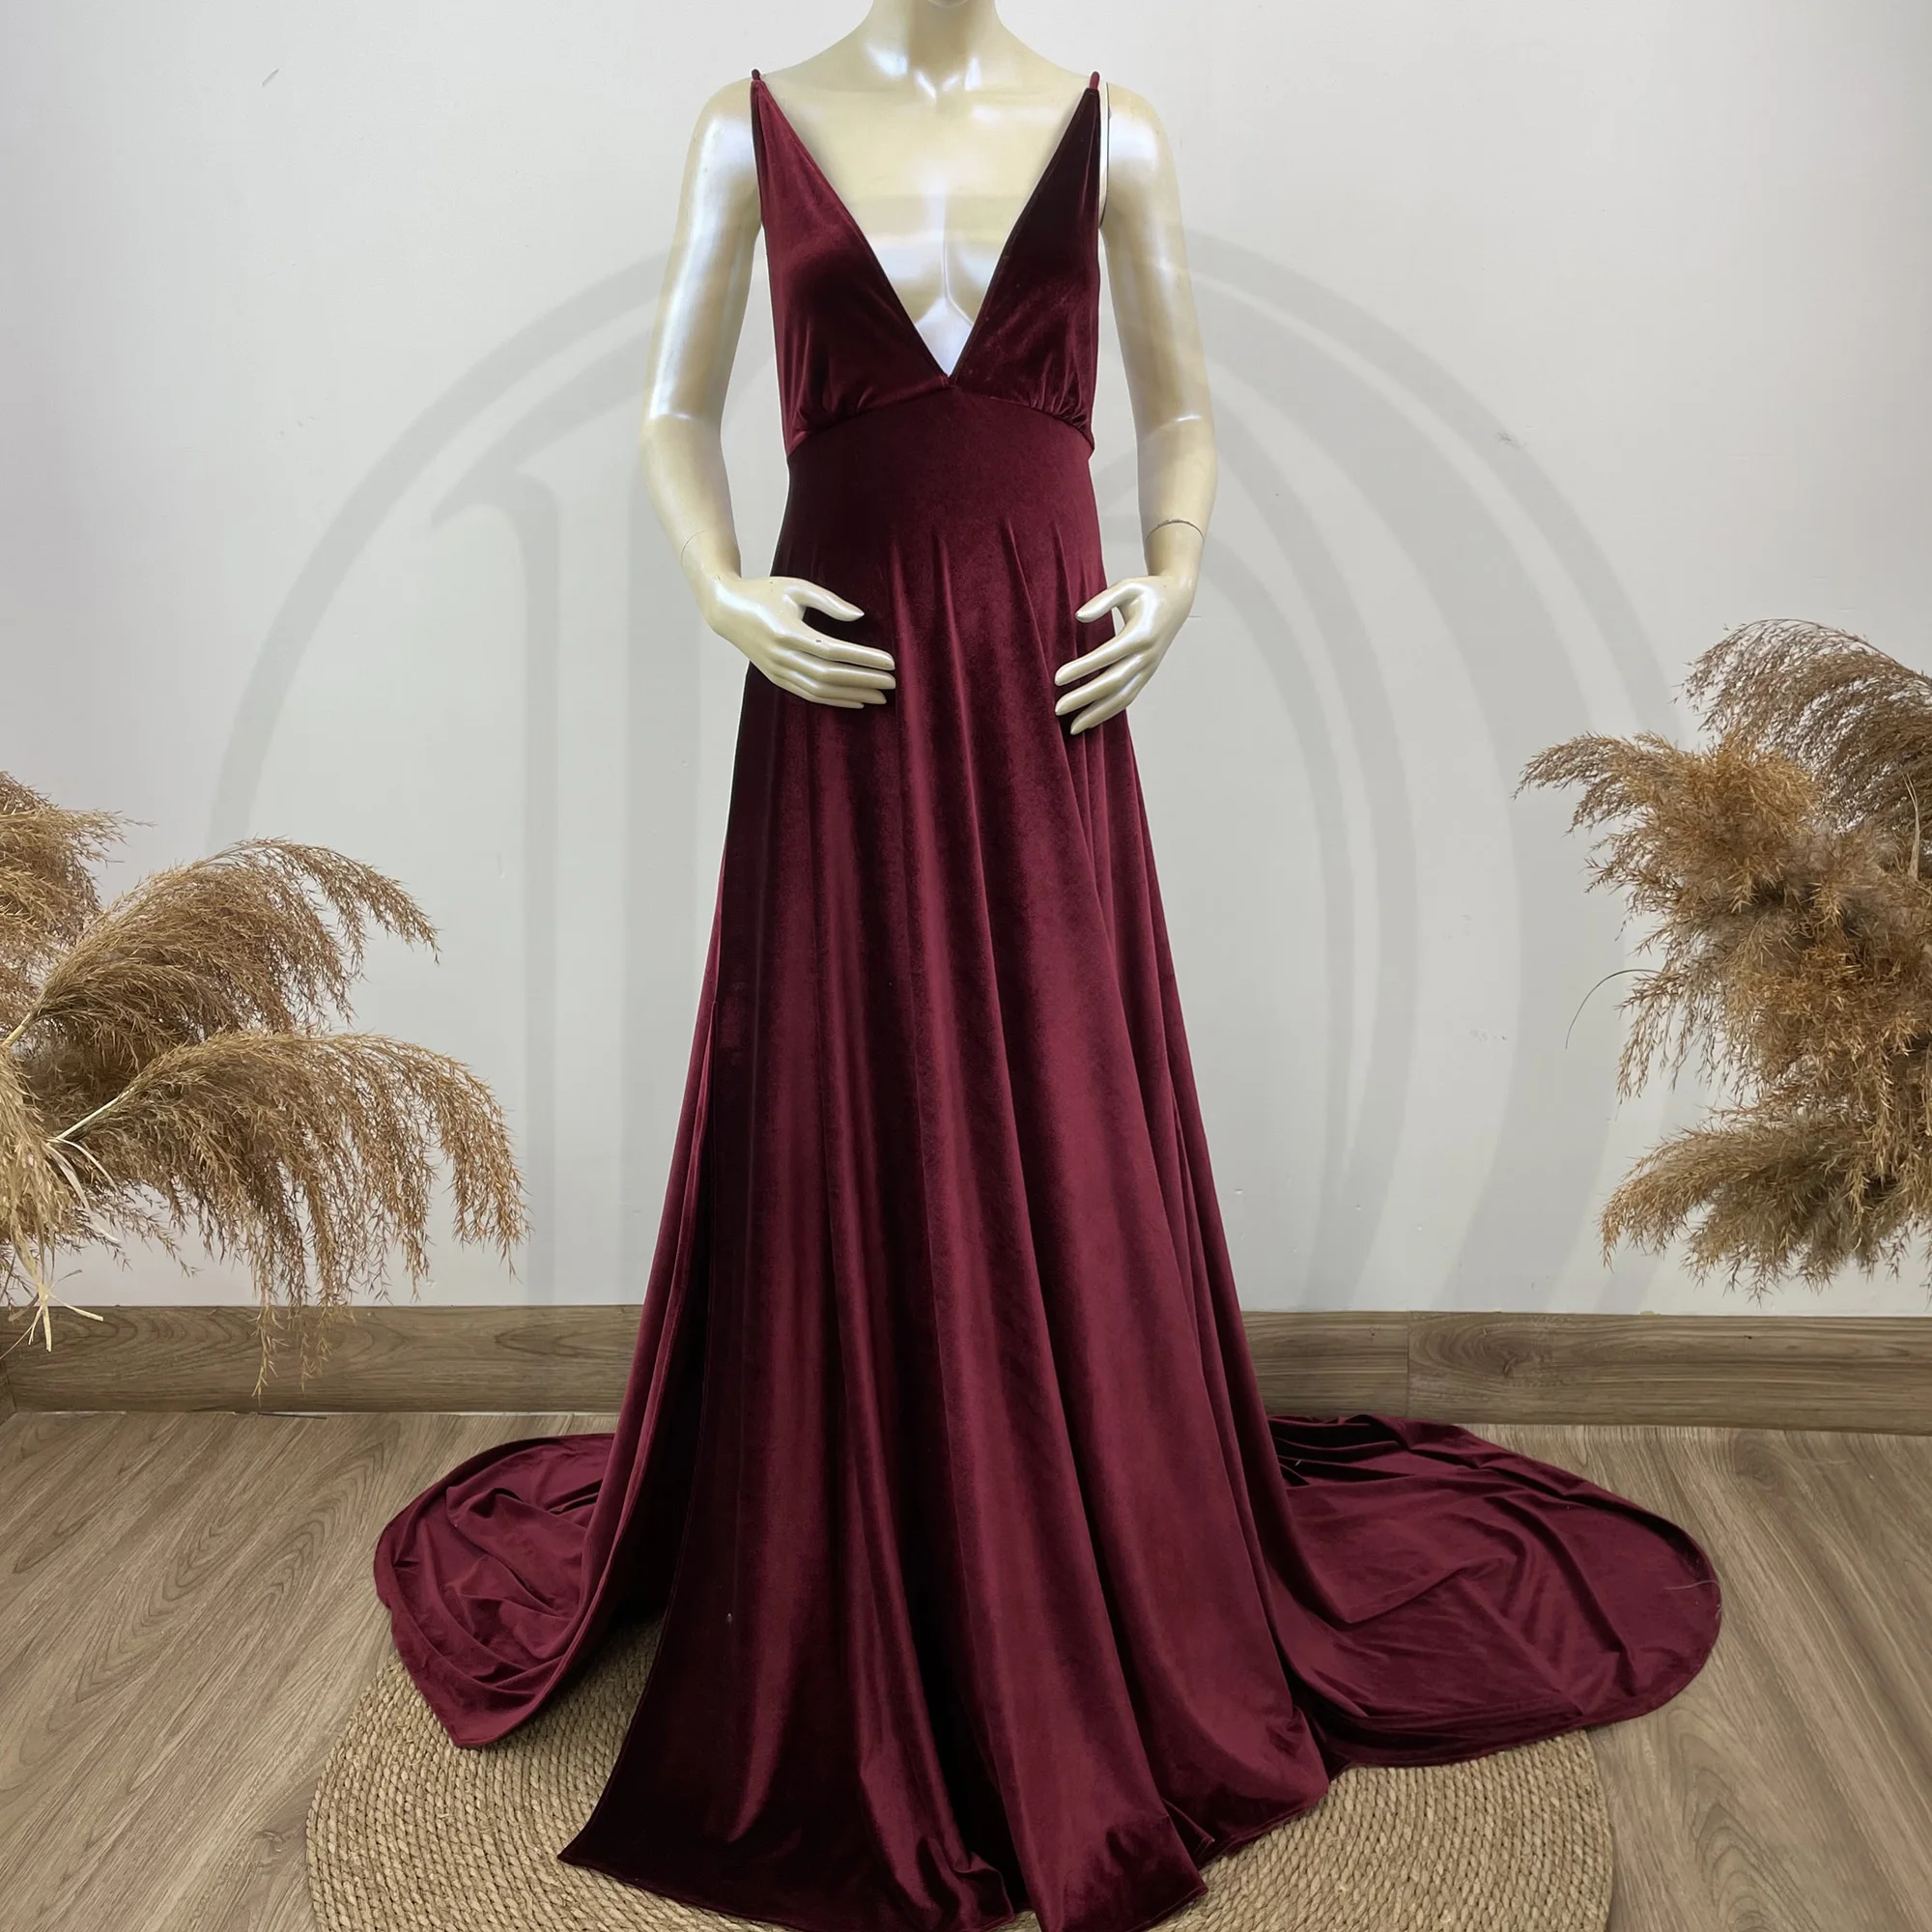 Soft Maxi Long Deep V Maternity Dress Pregnant Velvet Gown Evening Party Robe for Woman Photography Prop Baby Shower Costume